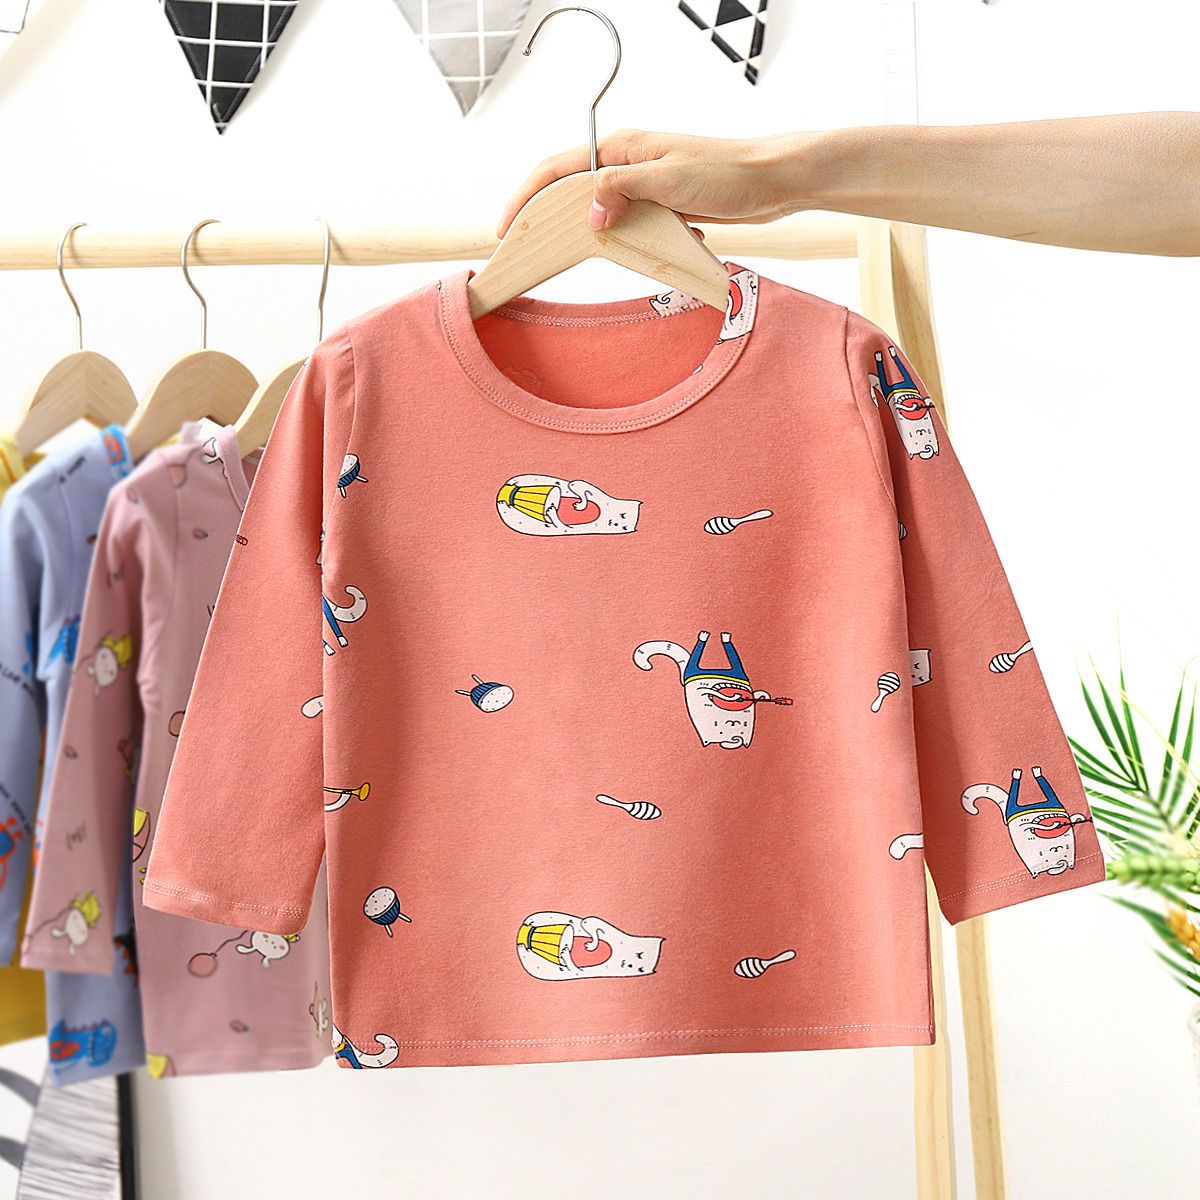 Children's Lycra cotton tops boys and girls spring and autumn baby bottoming autumn clothes long-sleeved T-shirts big children's home clothes